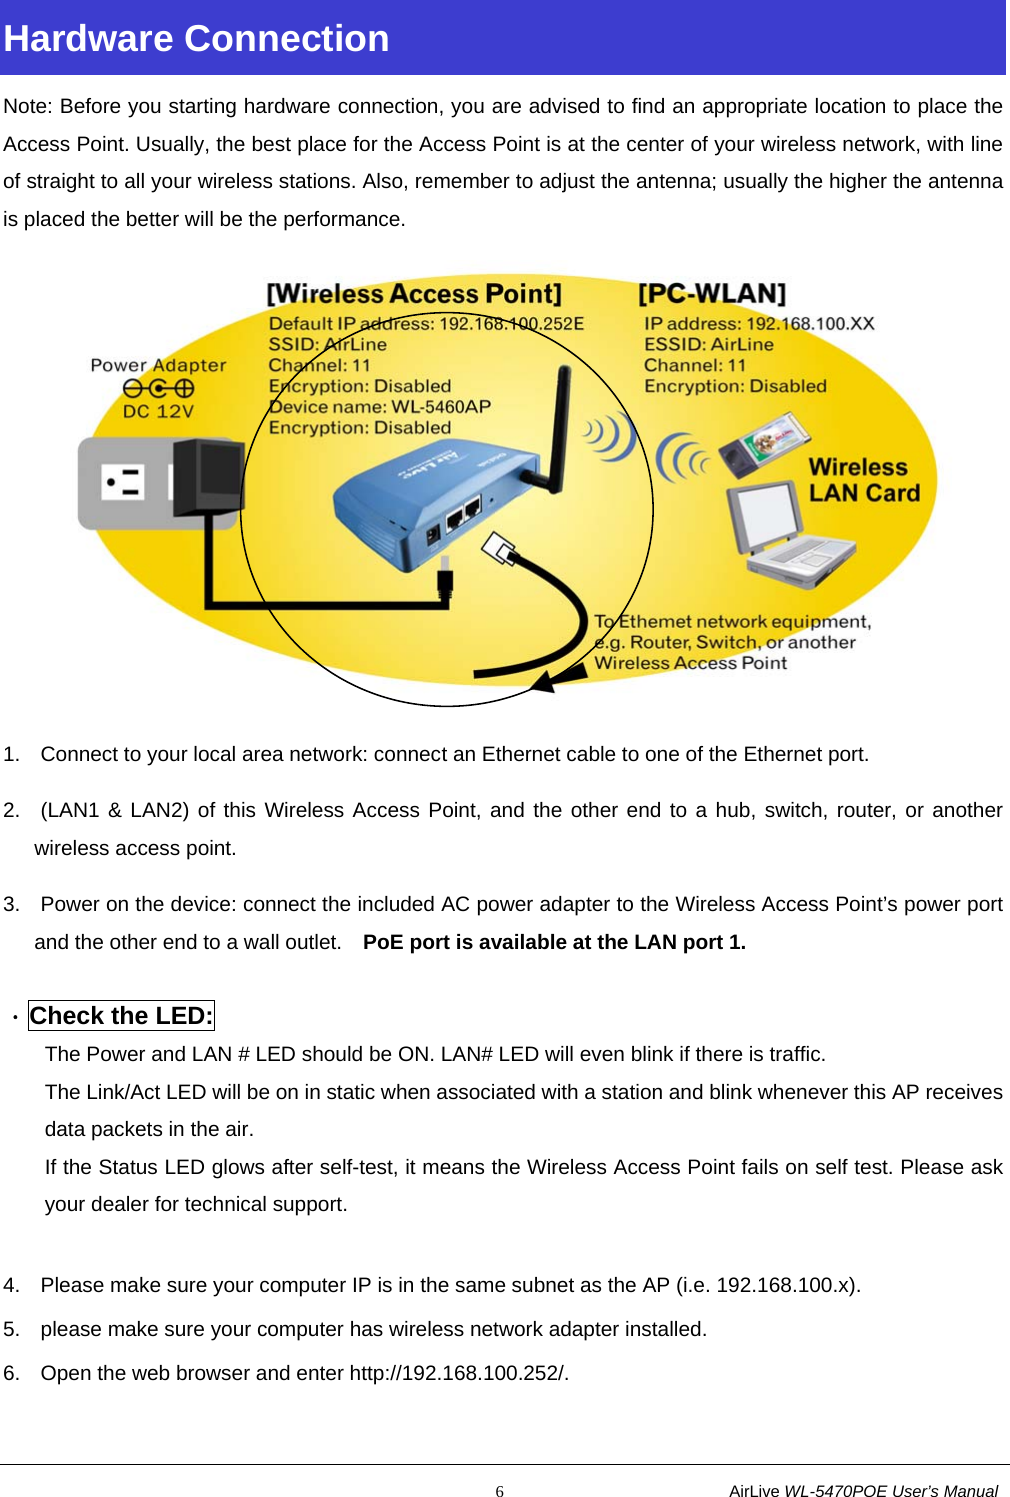                                                           6                           AirLive WL-5470POE User’s Manual Hardware Connection Note: Before you starting hardware connection, you are advised to find an appropriate location to place the Access Point. Usually, the best place for the Access Point is at the center of your wireless network, with line of straight to all your wireless stations. Also, remember to adjust the antenna; usually the higher the antenna is placed the better will be the performance.  1.  Connect to your local area network: connect an Ethernet cable to one of the Ethernet port. 2.  (LAN1 &amp; LAN2) of this Wireless Access Point, and the other end to a hub, switch, router, or another    wireless access point. 3.  Power on the device: connect the included AC power adapter to the Wireless Access Point’s power port and the other end to a wall outlet.    PoE port is available at the LAN port 1. ．Check the LED: The Power and LAN # LED should be ON. LAN# LED will even blink if there is traffic. The Link/Act LED will be on in static when associated with a station and blink whenever this AP receives data packets in the air. If the Status LED glows after self-test, it means the Wireless Access Point fails on self test. Please ask your dealer for technical support.  4.  Please make sure your computer IP is in the same subnet as the AP (i.e. 192.168.100.x). 5.  please make sure your computer has wireless network adapter installed. 6.  Open the web browser and enter http://192.168.100.252/. 